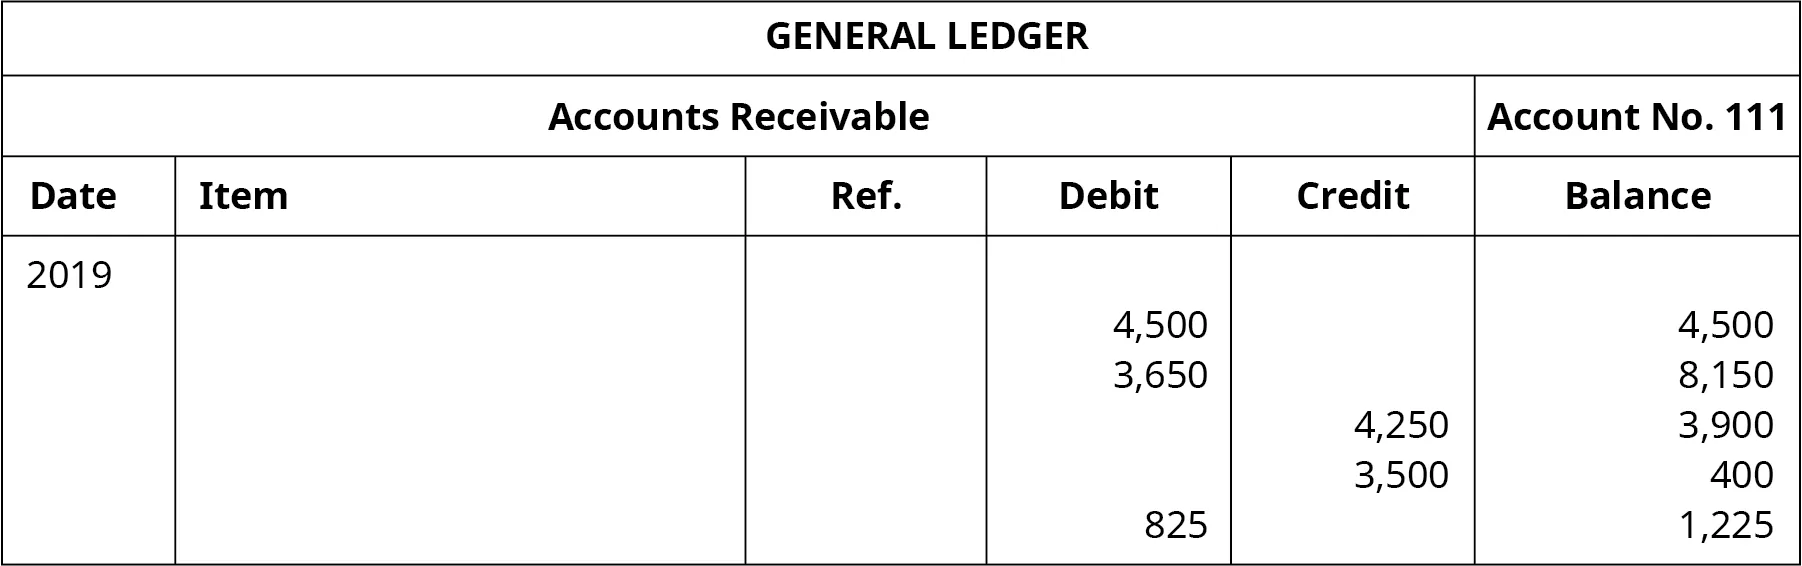 A General Ledger titled “Accounts Receivable No. 111” with six columns. Date: 2019. Six columns labeled left to right: Date, Item, Reference, Debit, Credit, Balance. Debit: 4,500; Balance: 4,500. Debit: 3,650; Balance: 8,150. Credit: 4,250; Balance: 3,900. Credit: 3,500; Balance: 400. Debit: 825; Balance: 1,225.